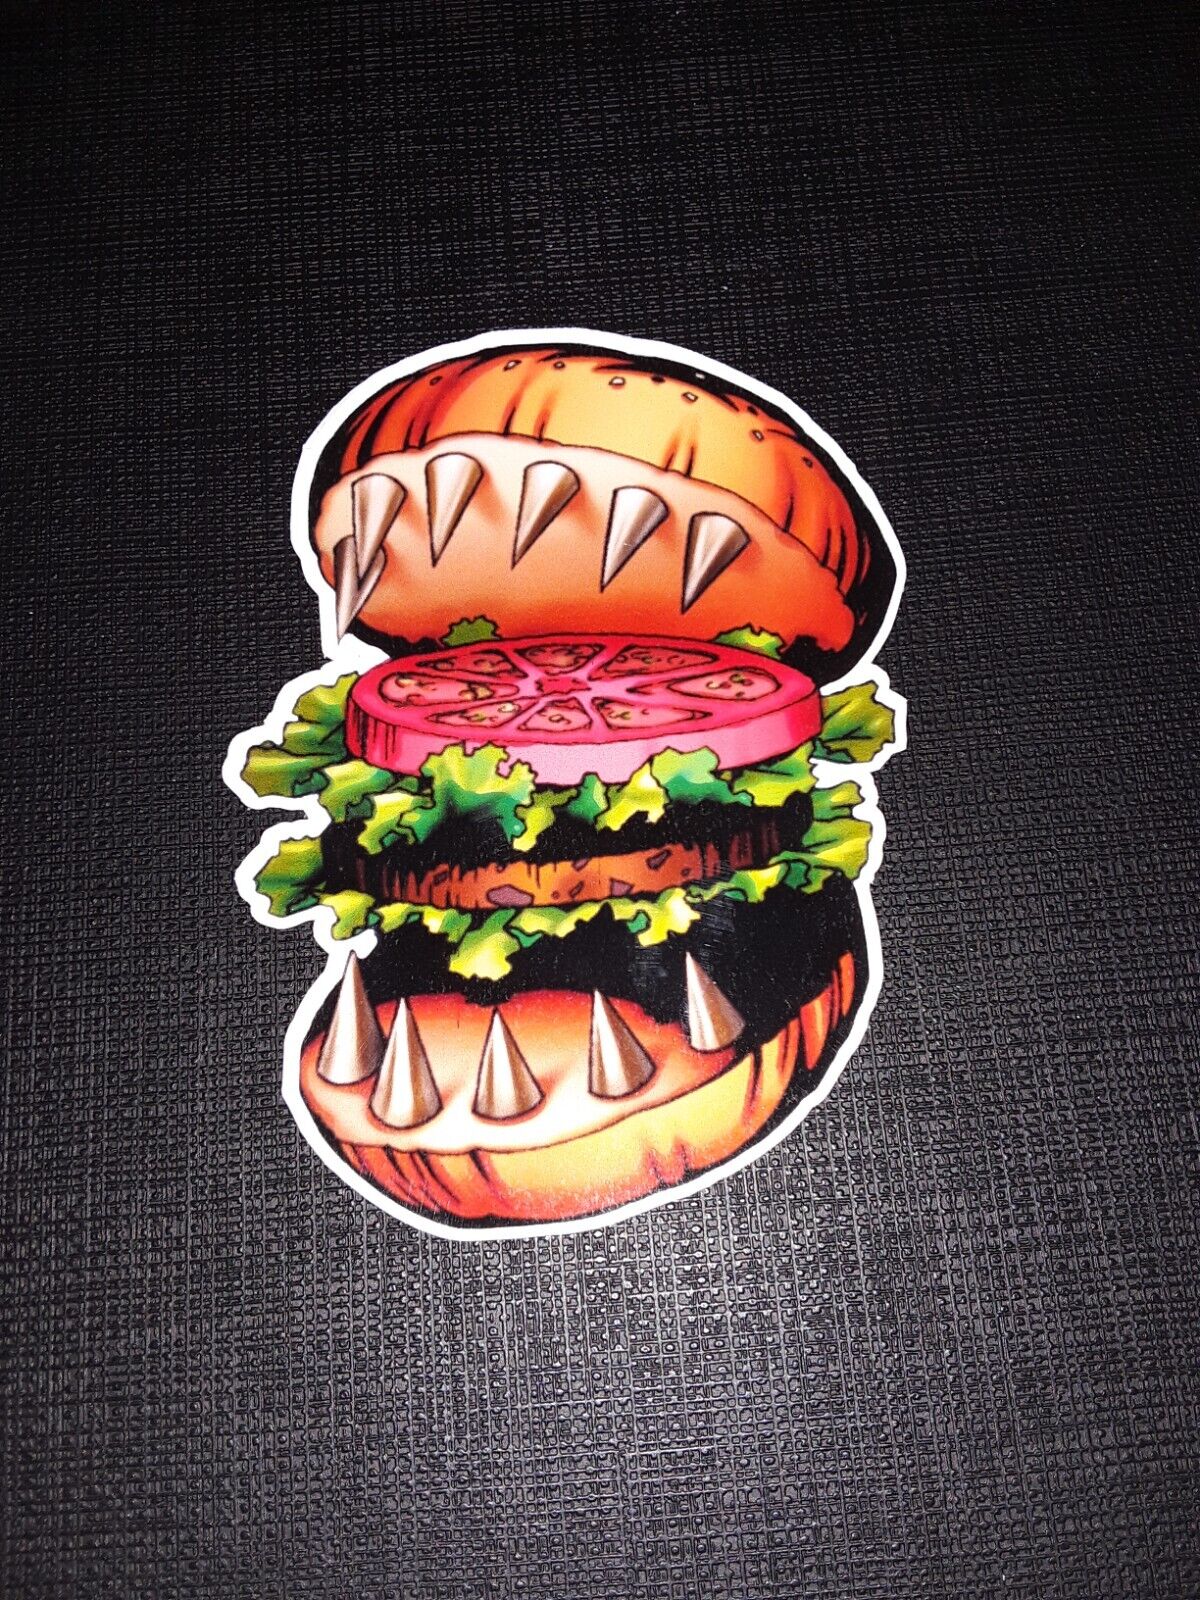 Yugioh Hungry Burger Glossy Sticker Anime Funny Waterproof